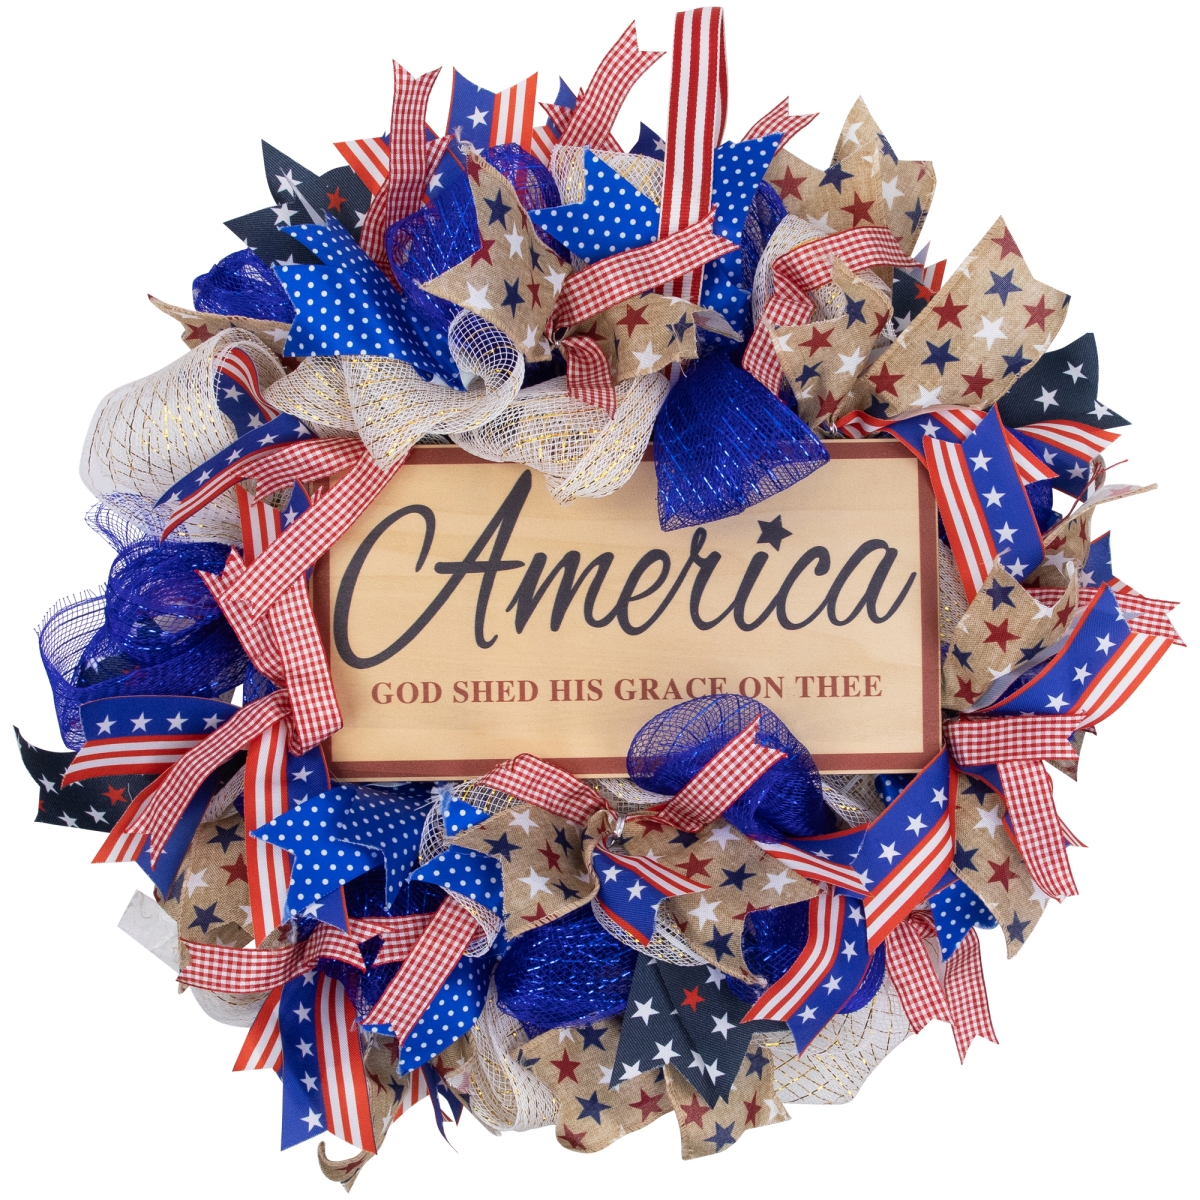 Picture of Northlight 35745098 18 in. Dia. Stars & Stripes America God Shed His Grace on Thee Patriotic Bow Wreath